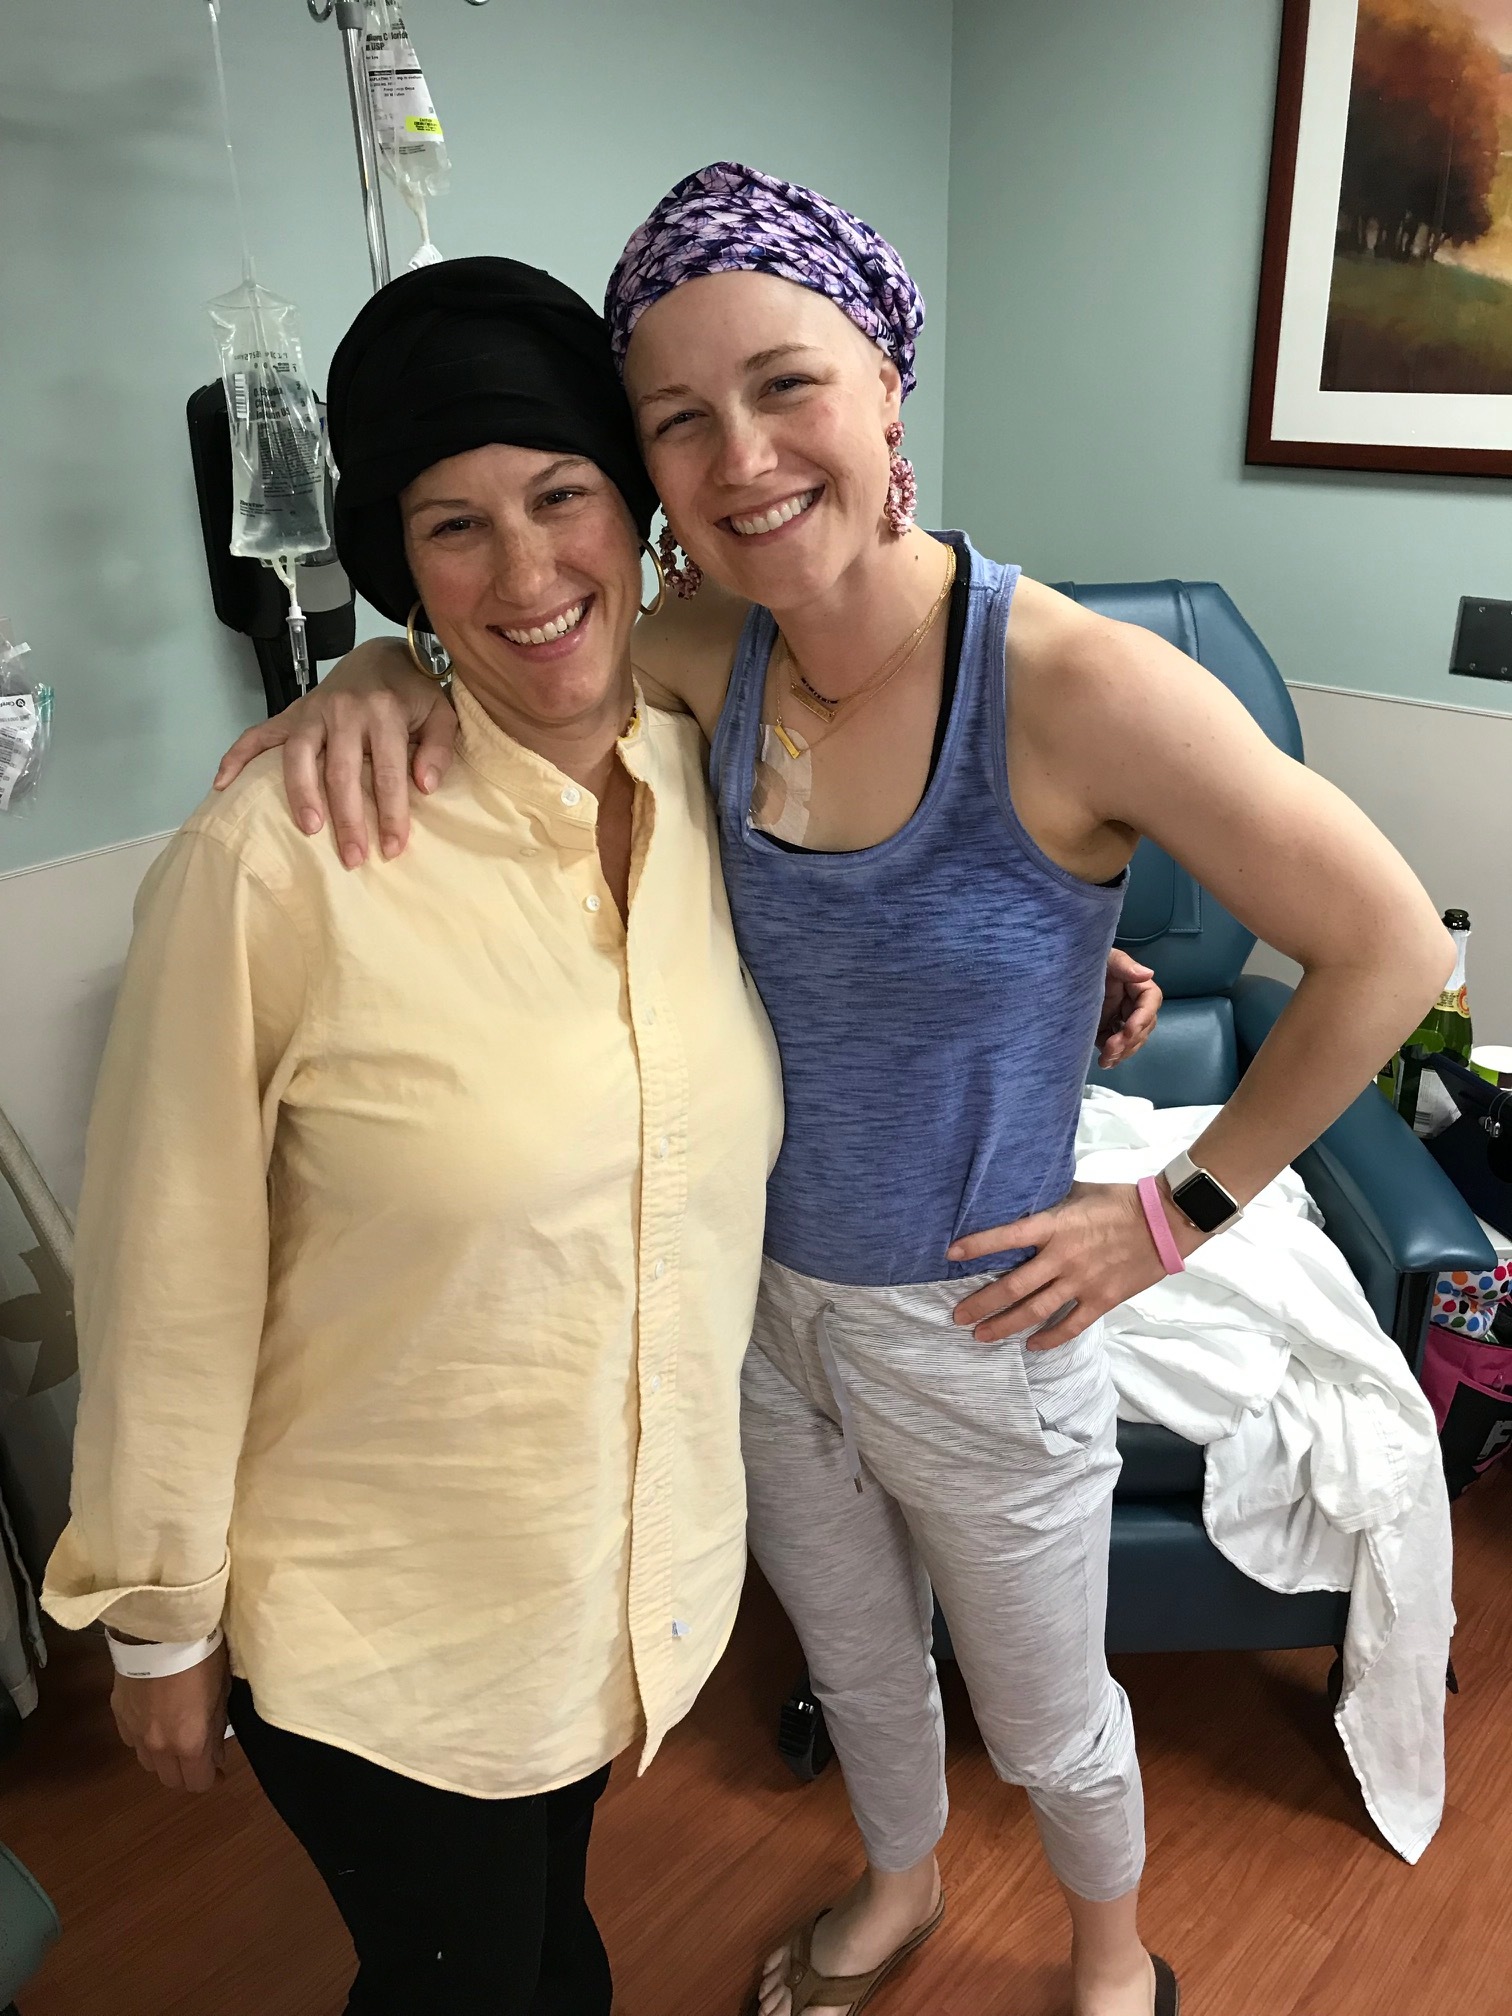 My friend has cancer! How can I help? — Jen Hoverstad